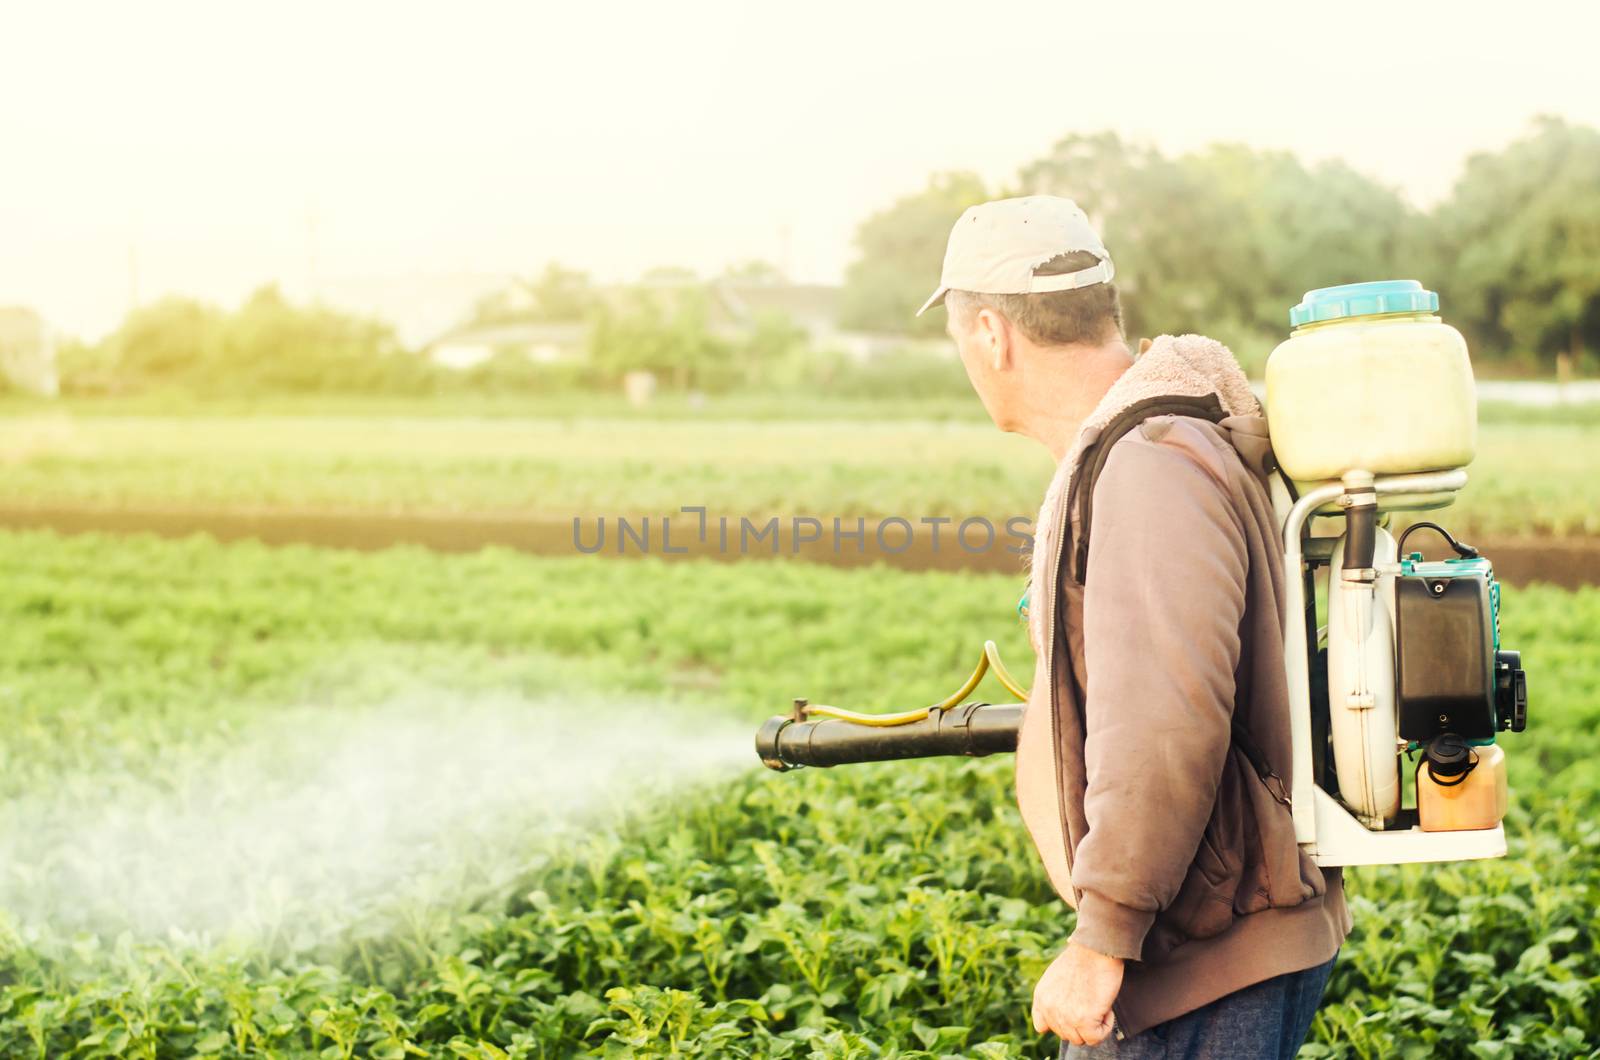 A farmer with a mist sprayer spray treats the potato plantation from pests and fungus infection. Agriculture and agribusiness. Harvest processing. Protection and care. Use chemicals in agriculture.